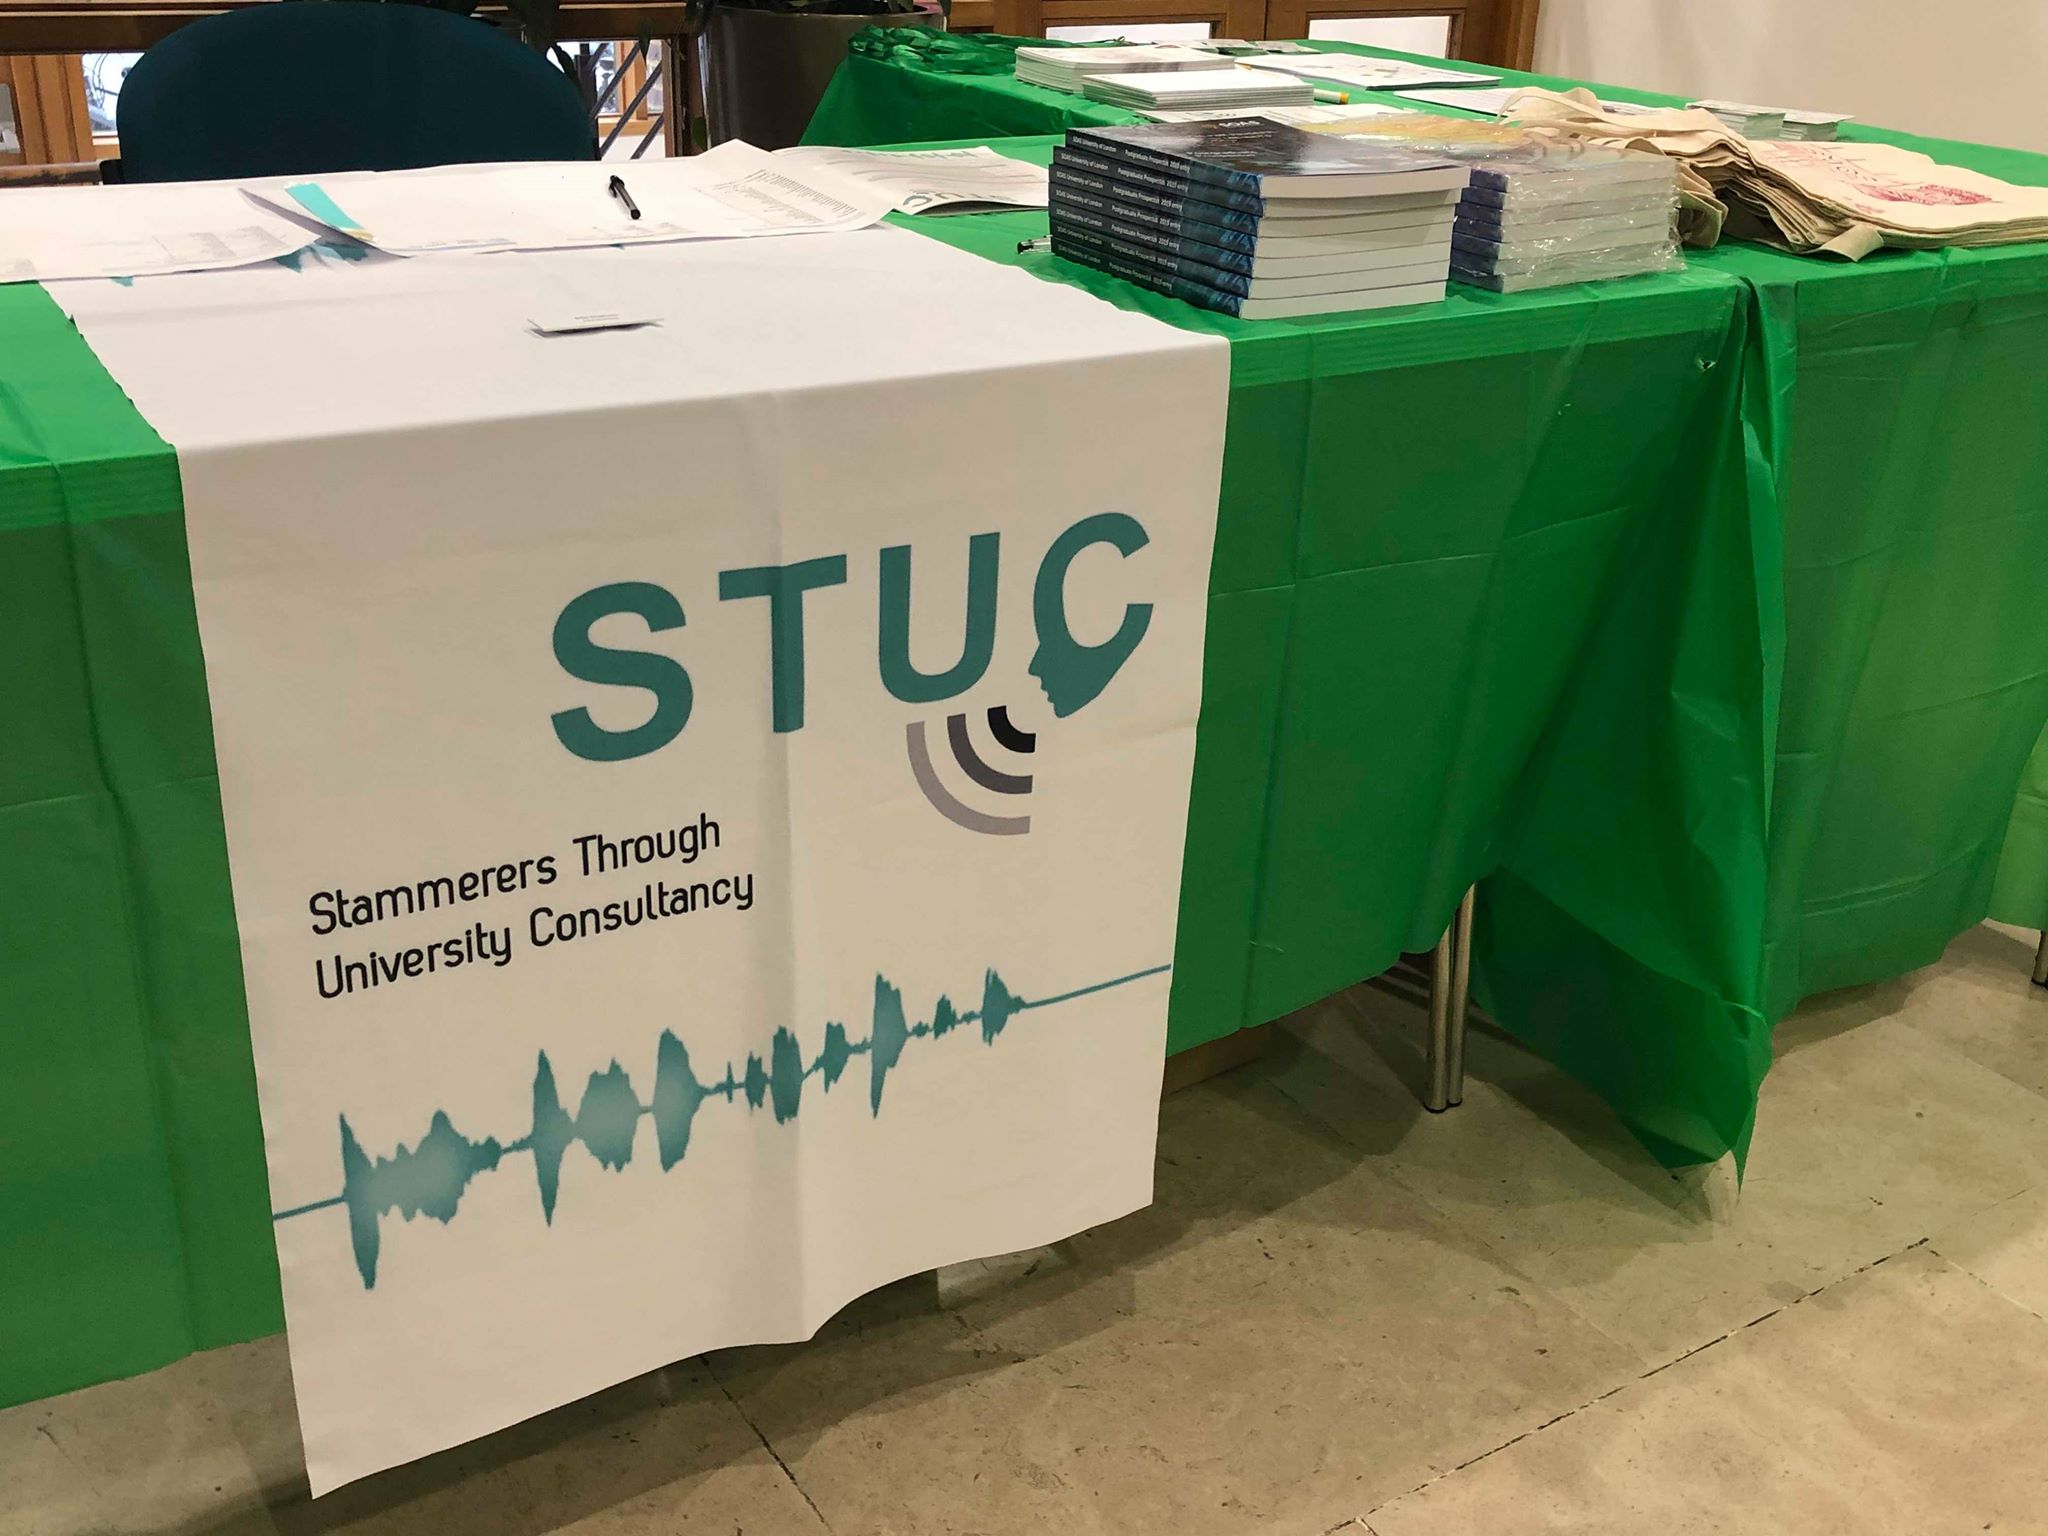 An information stall with a sign saying 'STUC: Stammerers Through University Consultancy'